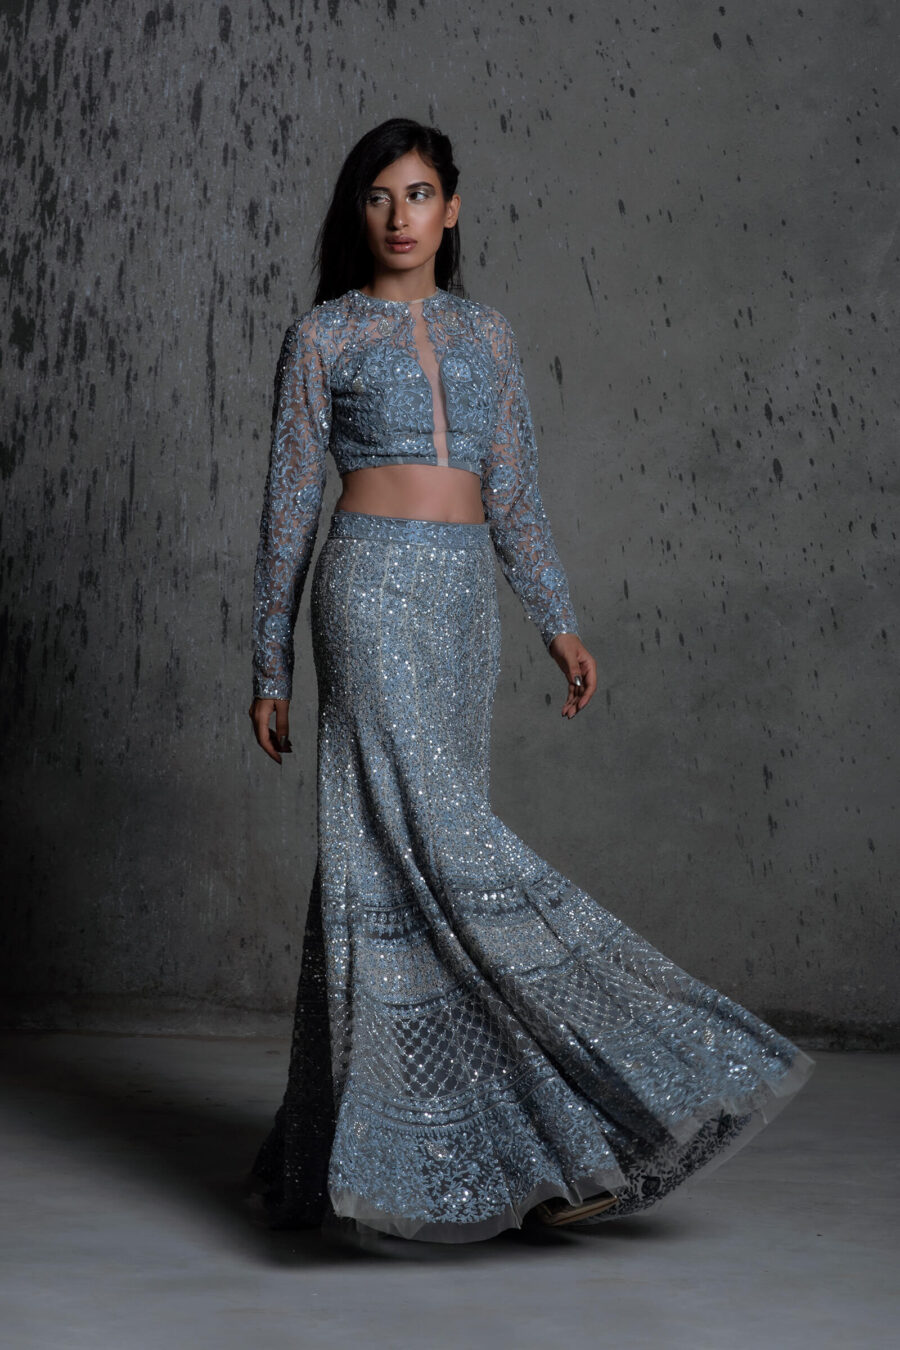 Photo of Silver Blouse and Shimmer Gold Lehenga